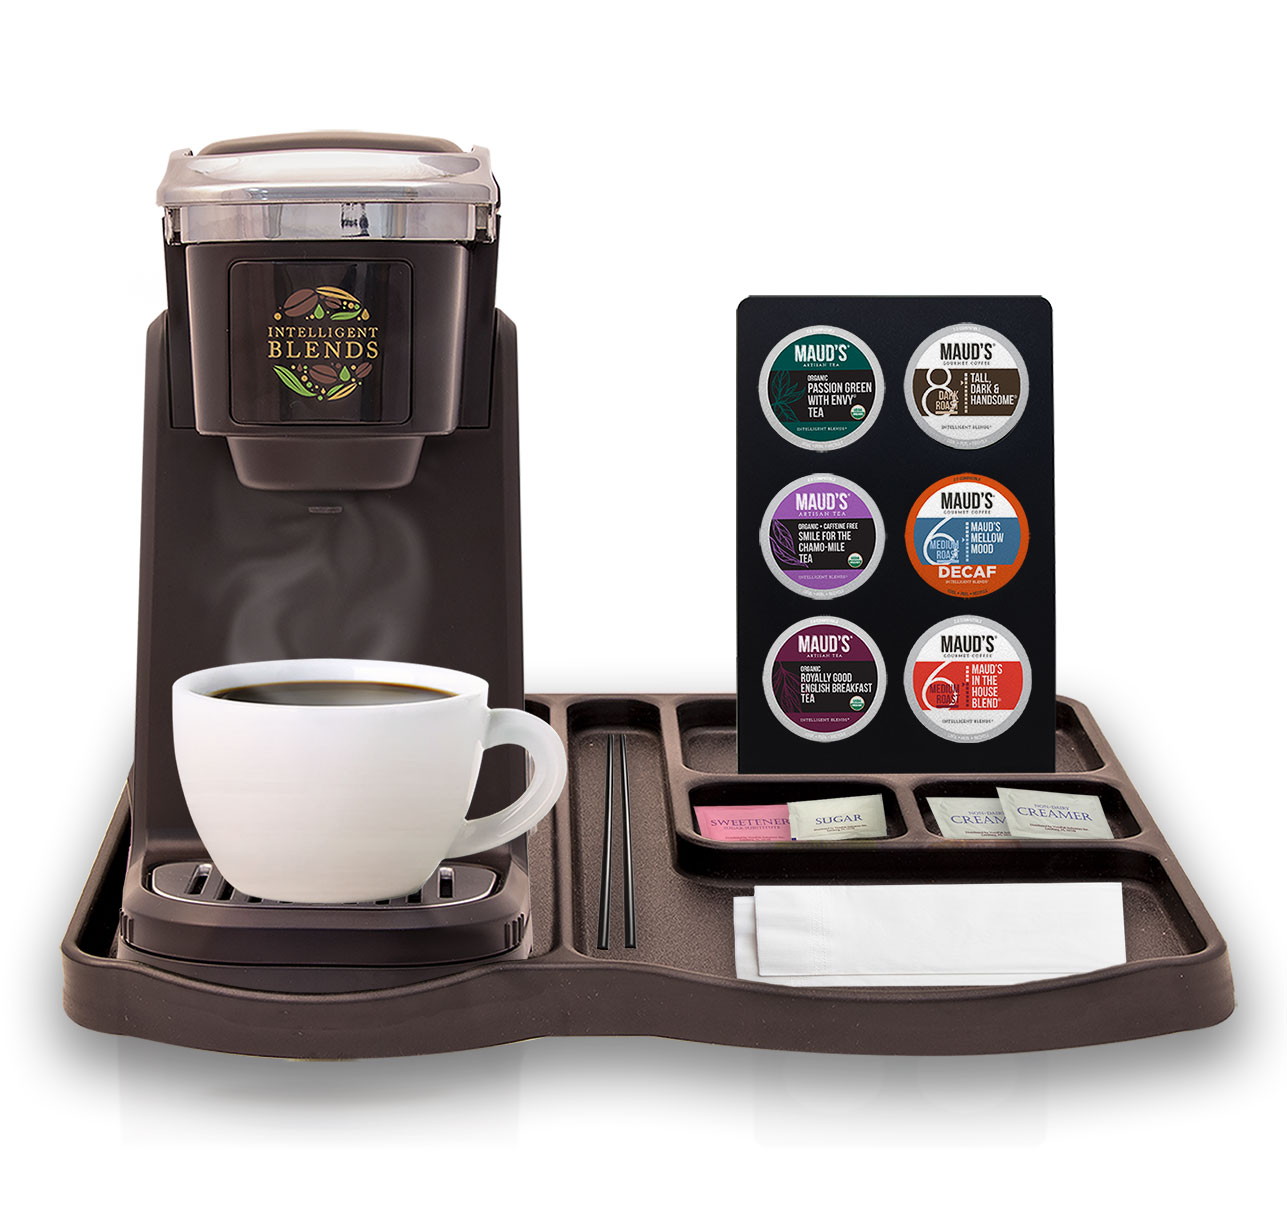 The Intelligent Blends Single-Serve brewer and accessories in-room coffee program